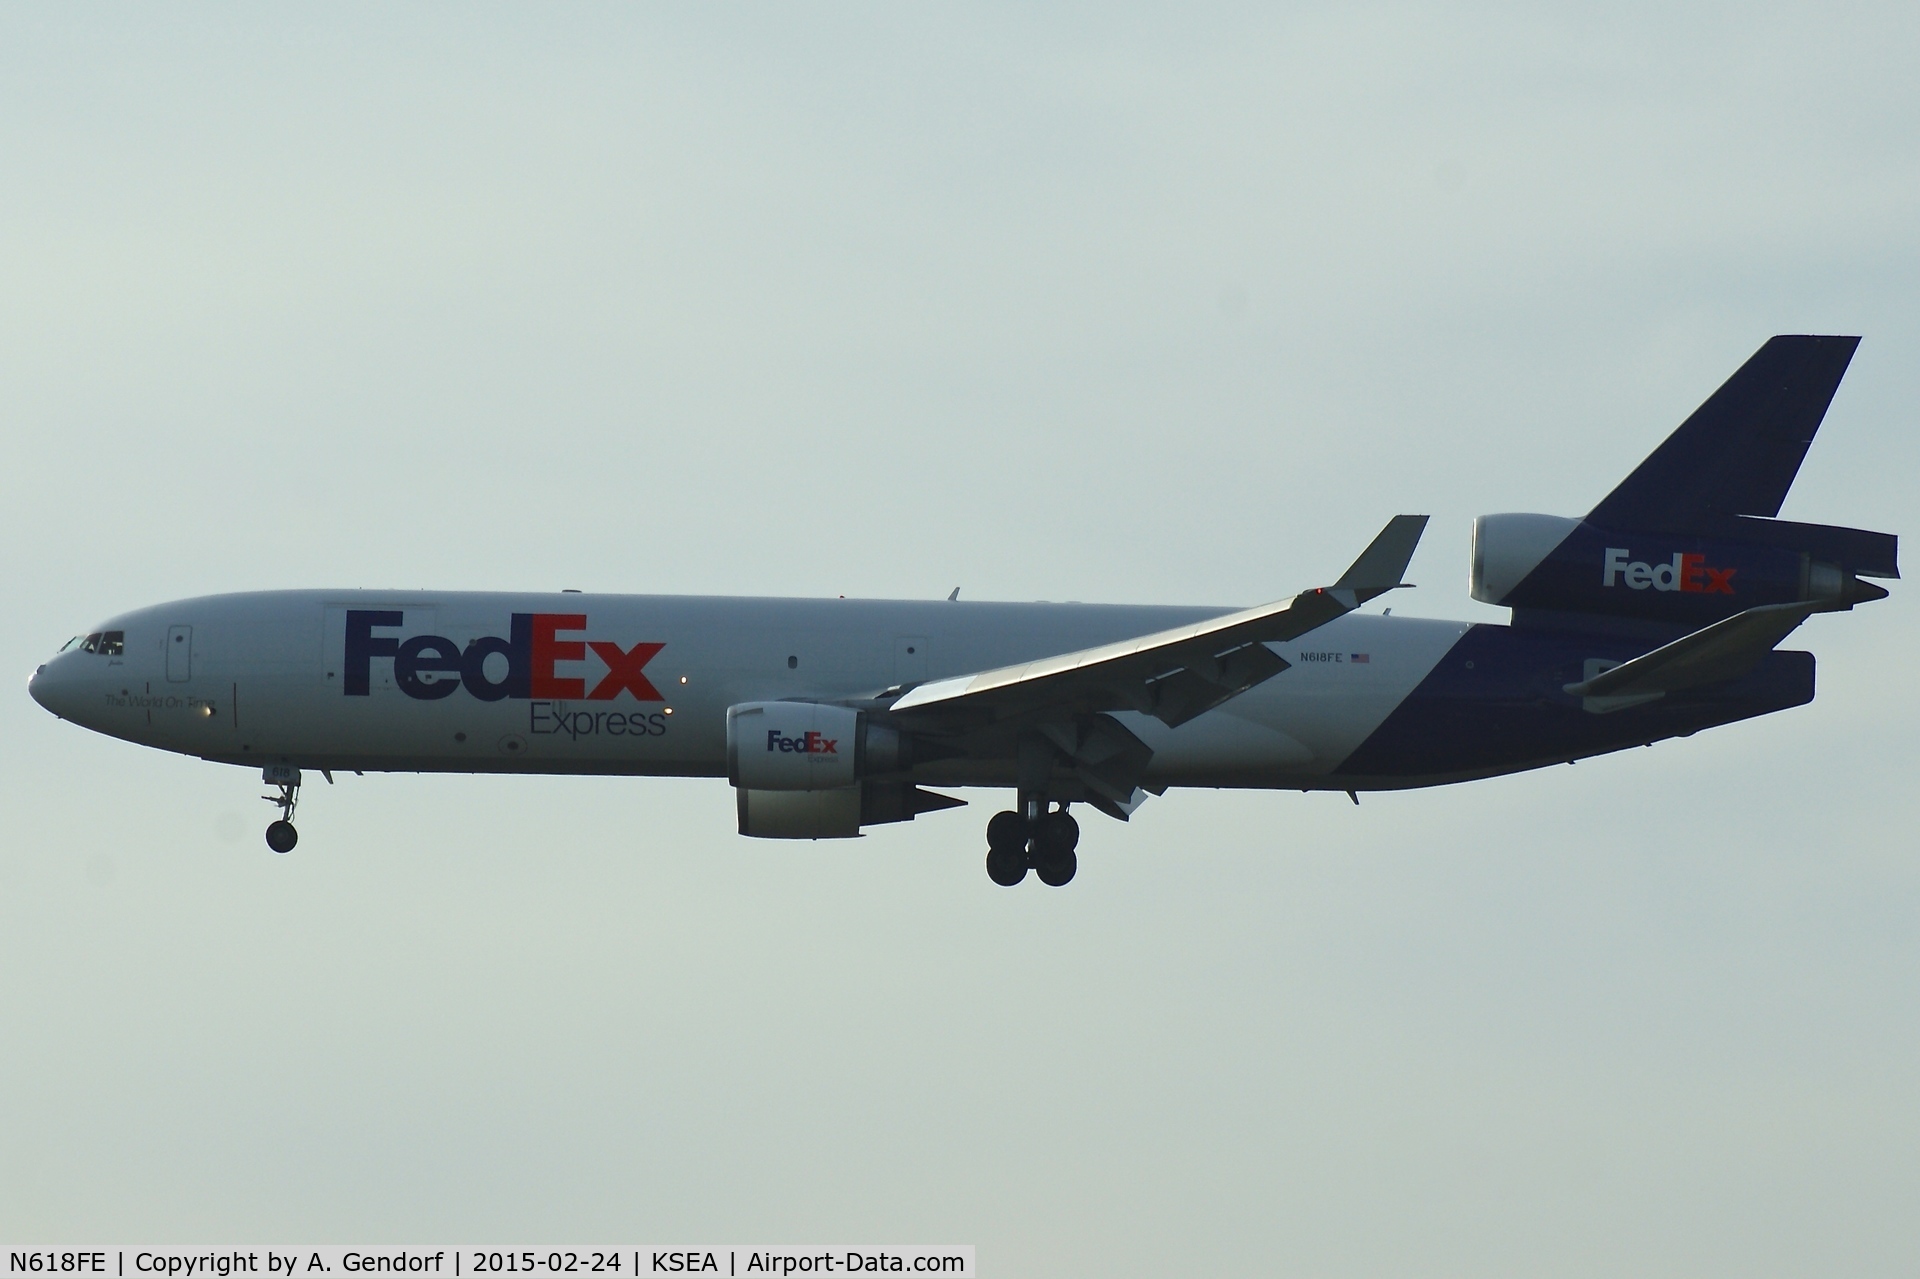 N618FE, 1996 McDonnell Douglas MD-11F C/N 48754, Fed Ex, is here arriving at Seattle-Tacoma Int'l(KSEA) from Oakland(KOAk)